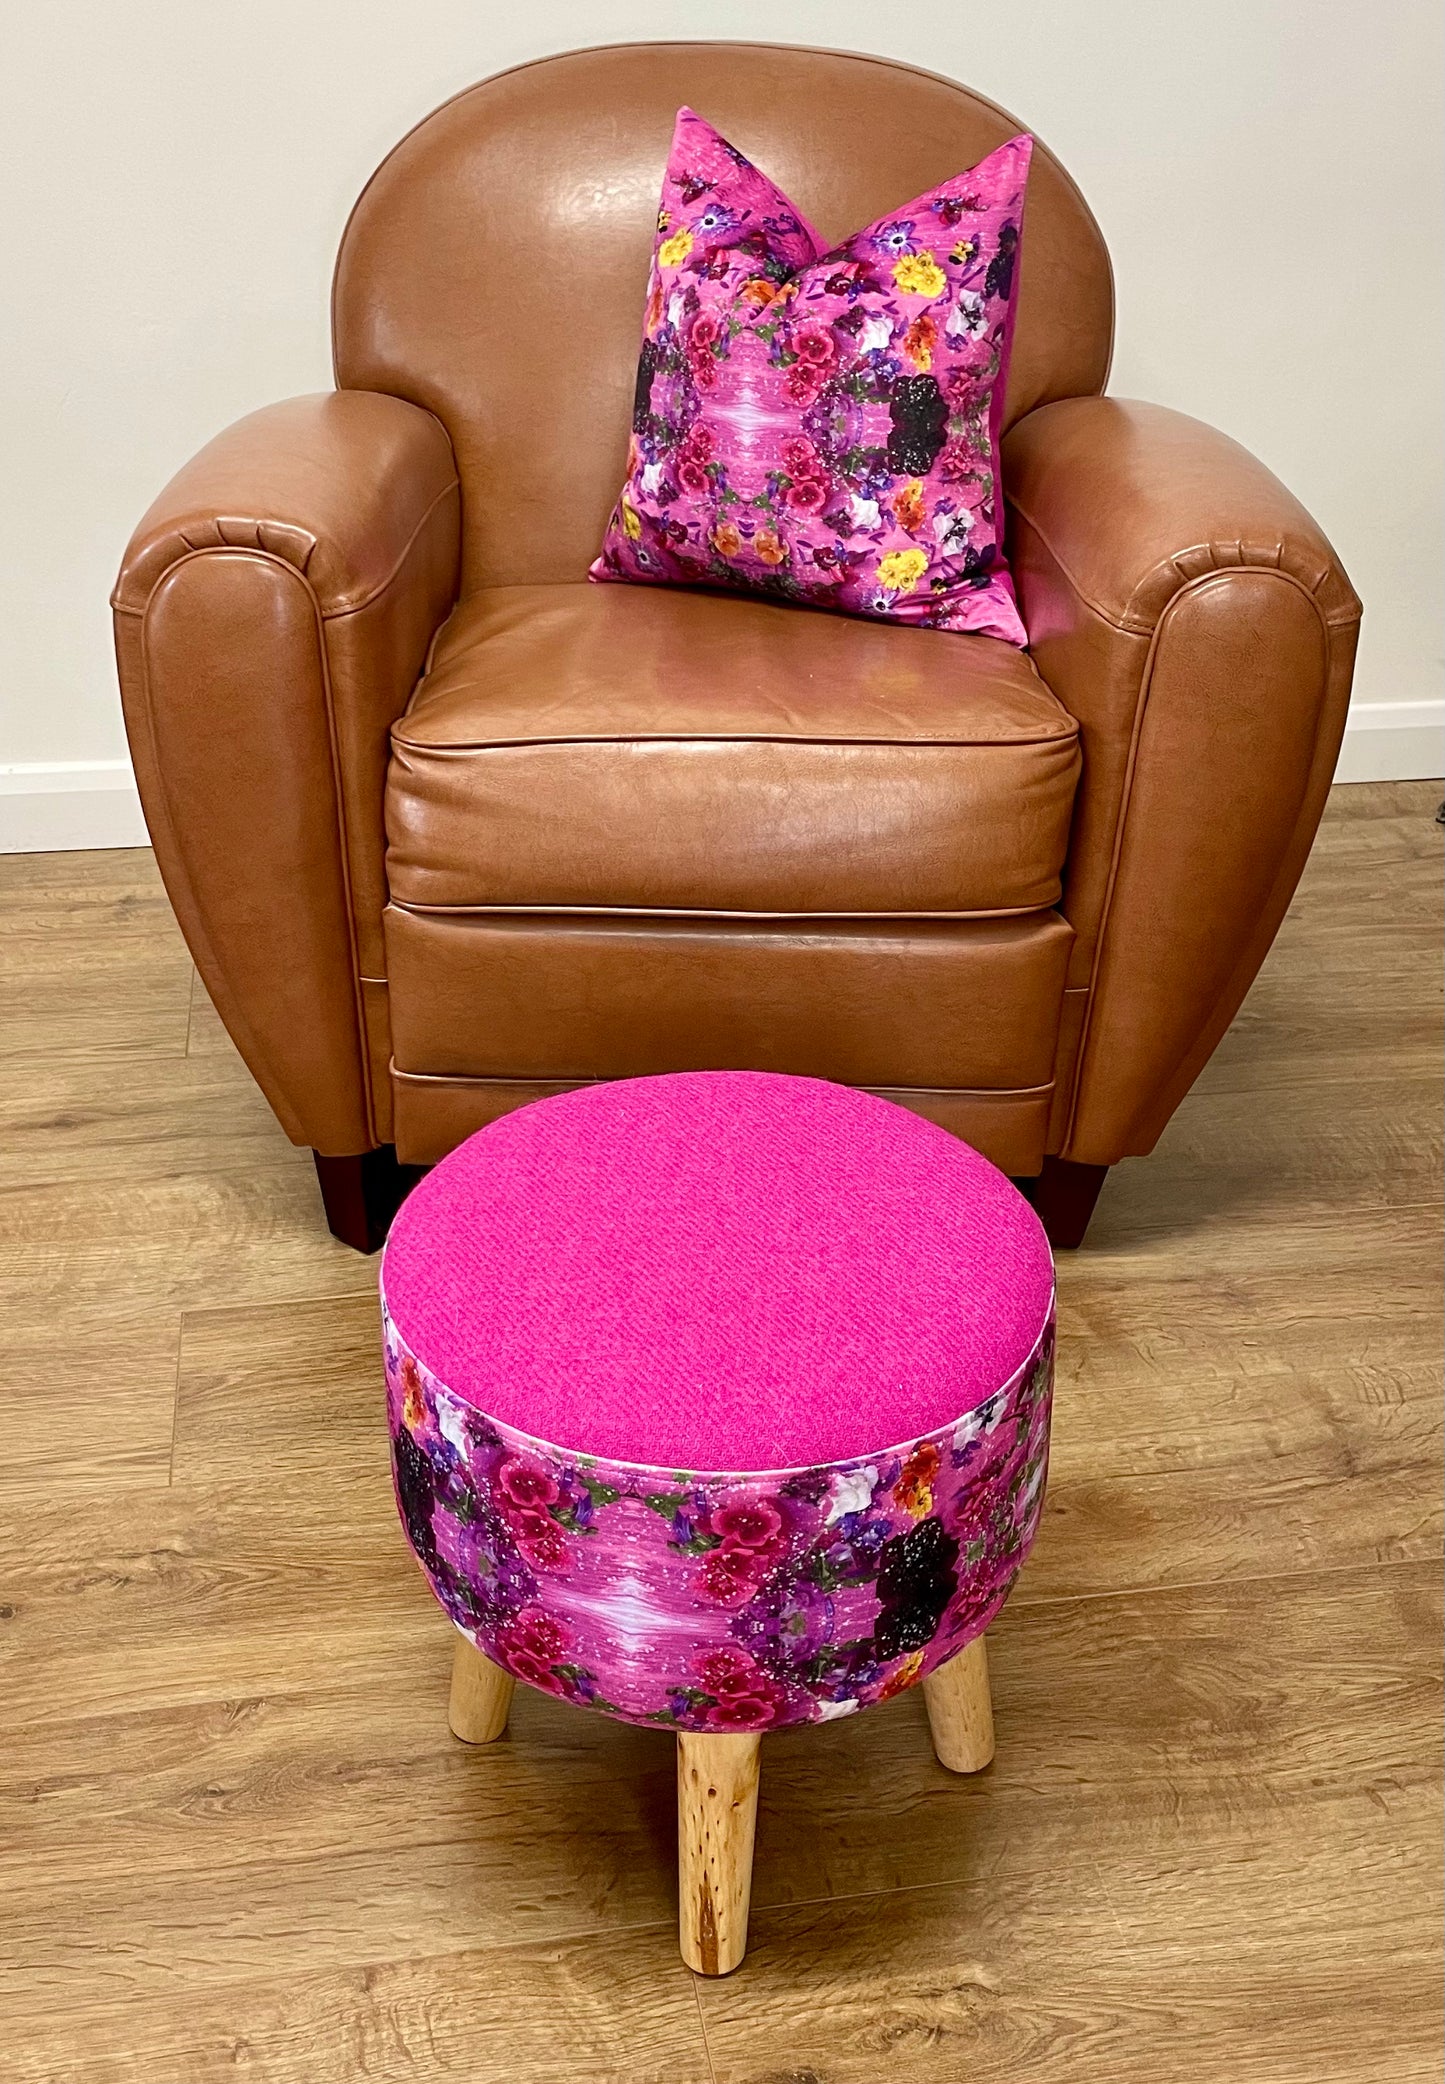 Pink Floral Velvet and Harris Tweed Upholstered Footstool with Light Rustic Wooden Legs.